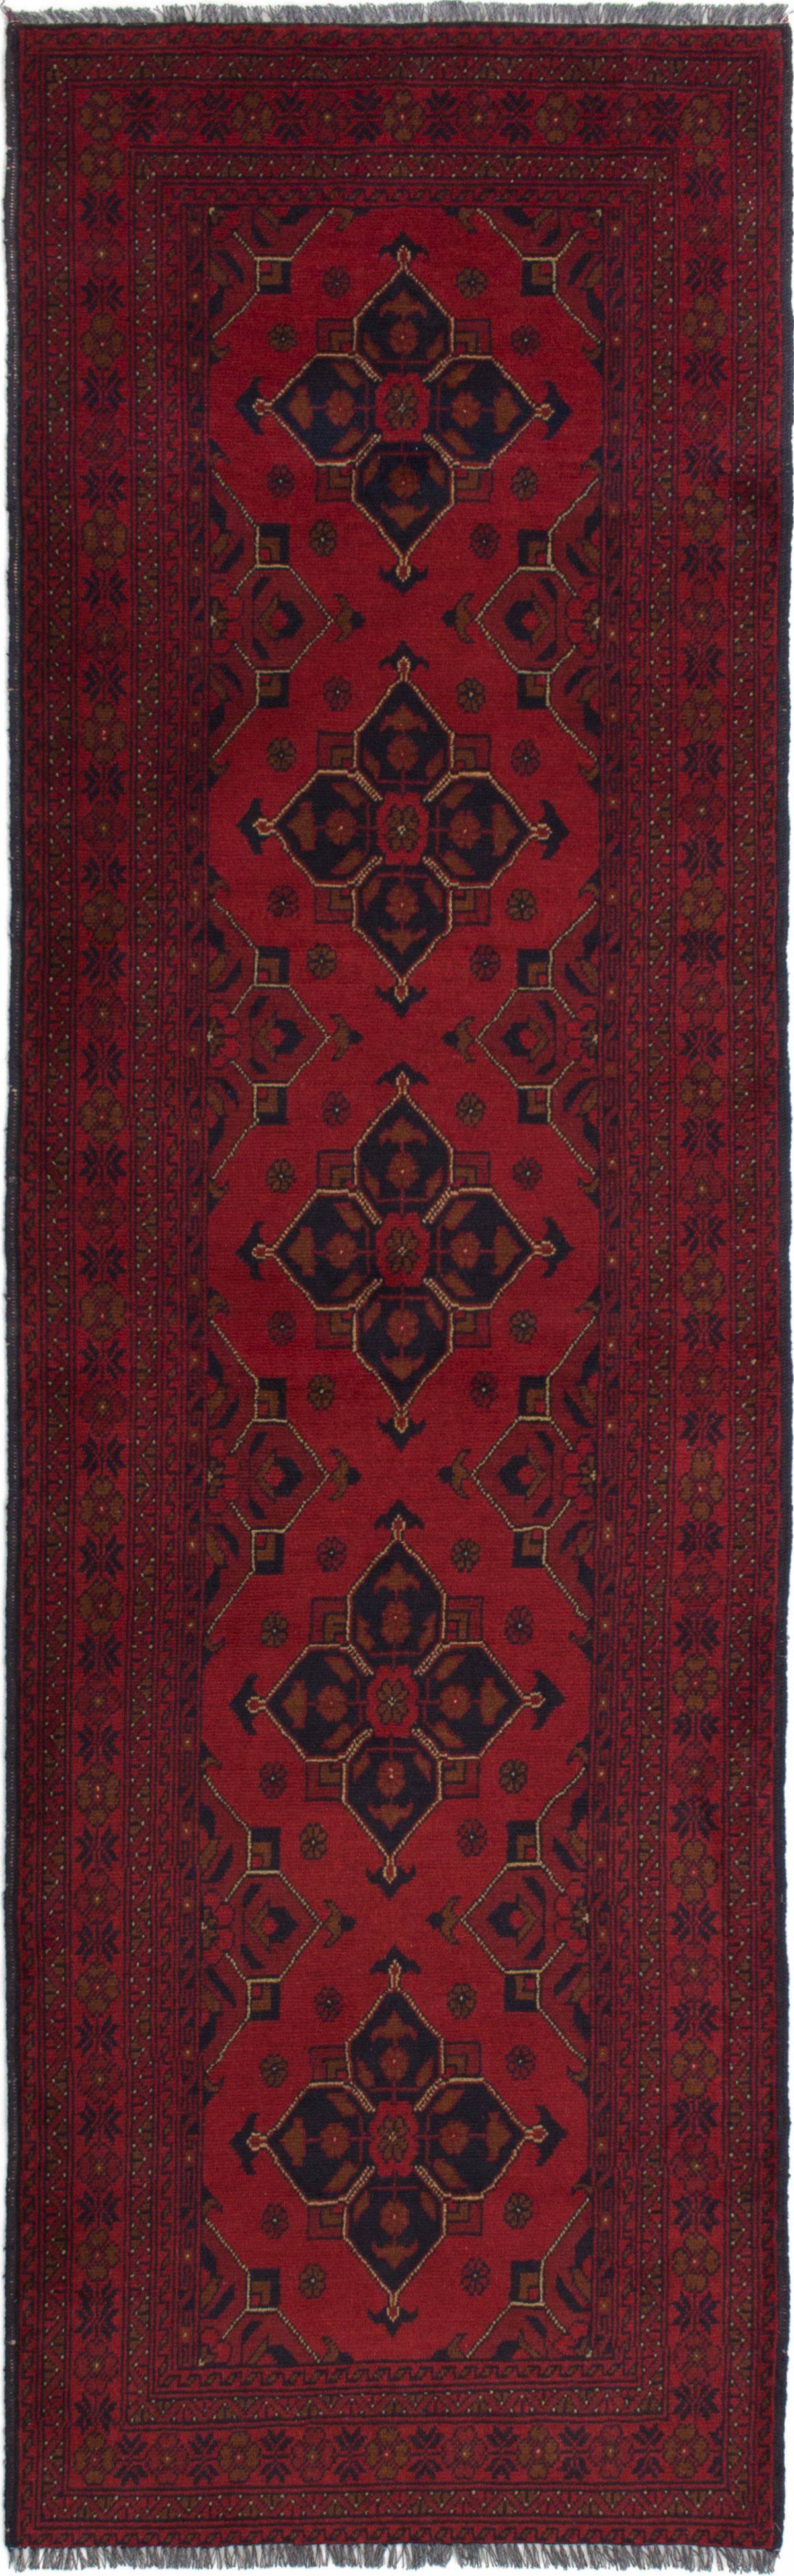 Hand-knotted Finest Khal Mohammadi Red Wool Rug 2'9" x 9'6"  Size: 2'9" x 9'6"  